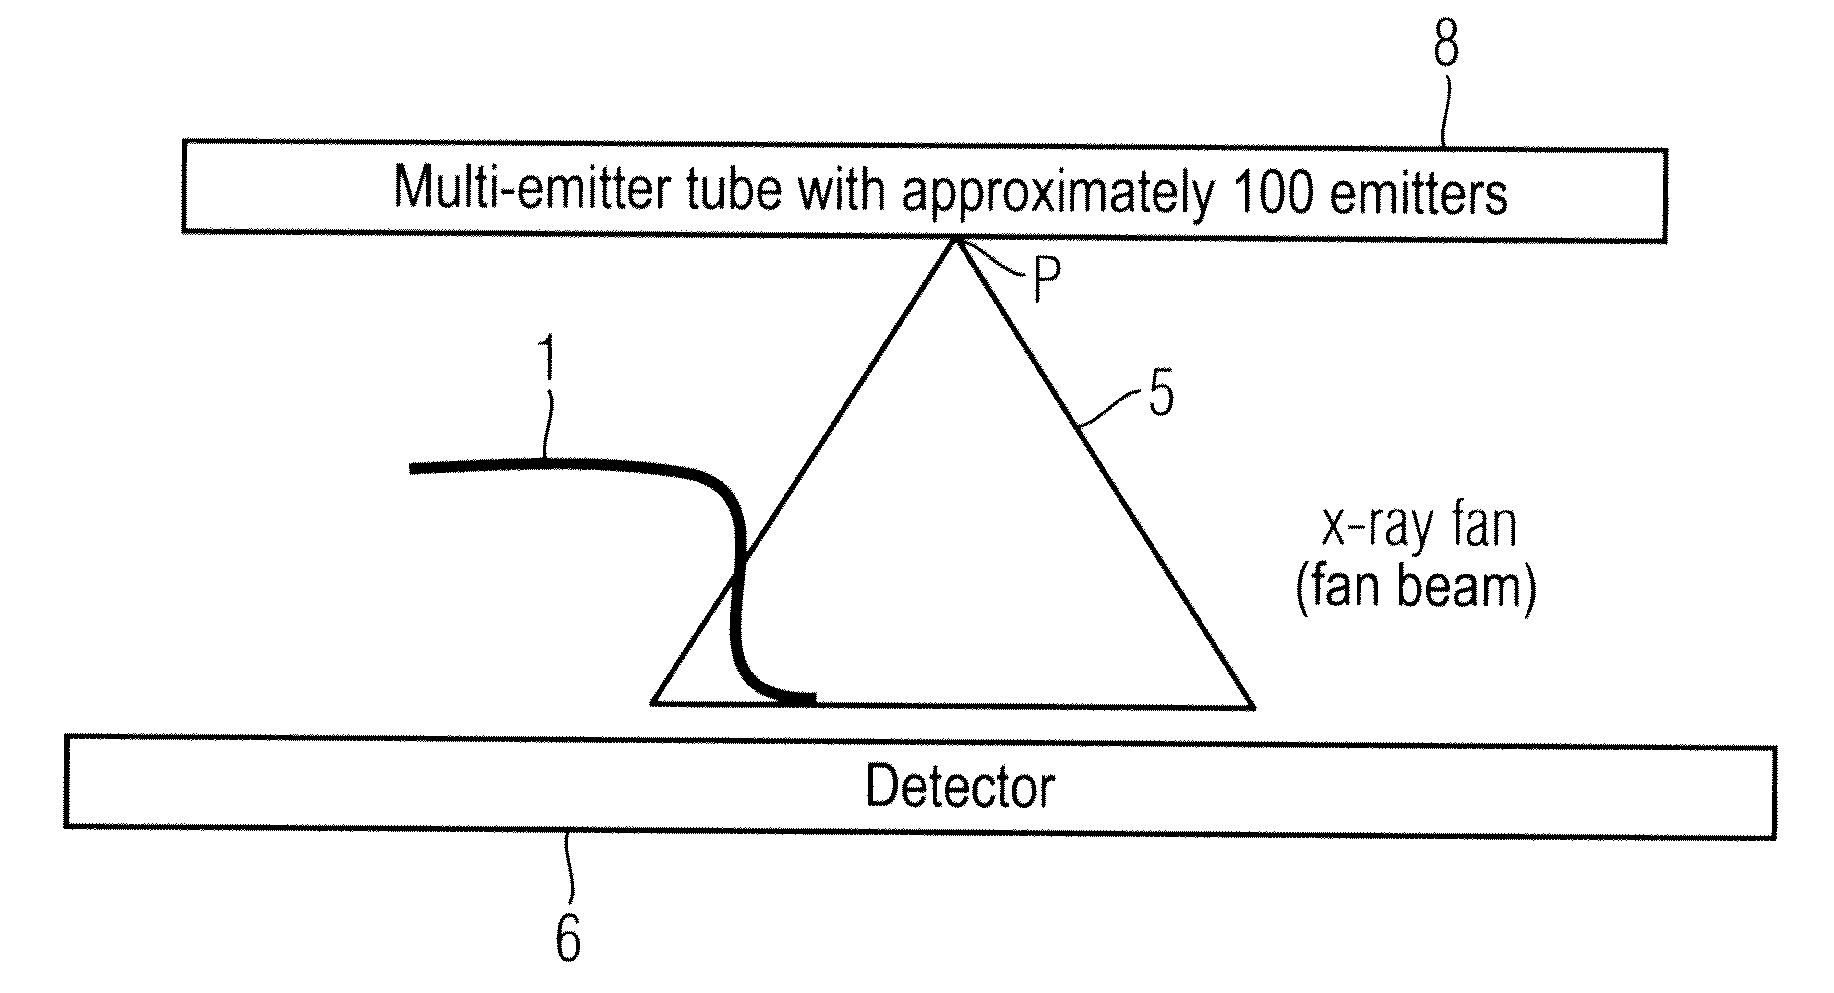 Device and method for x-ray examination of an object for material defects by means of x-rays